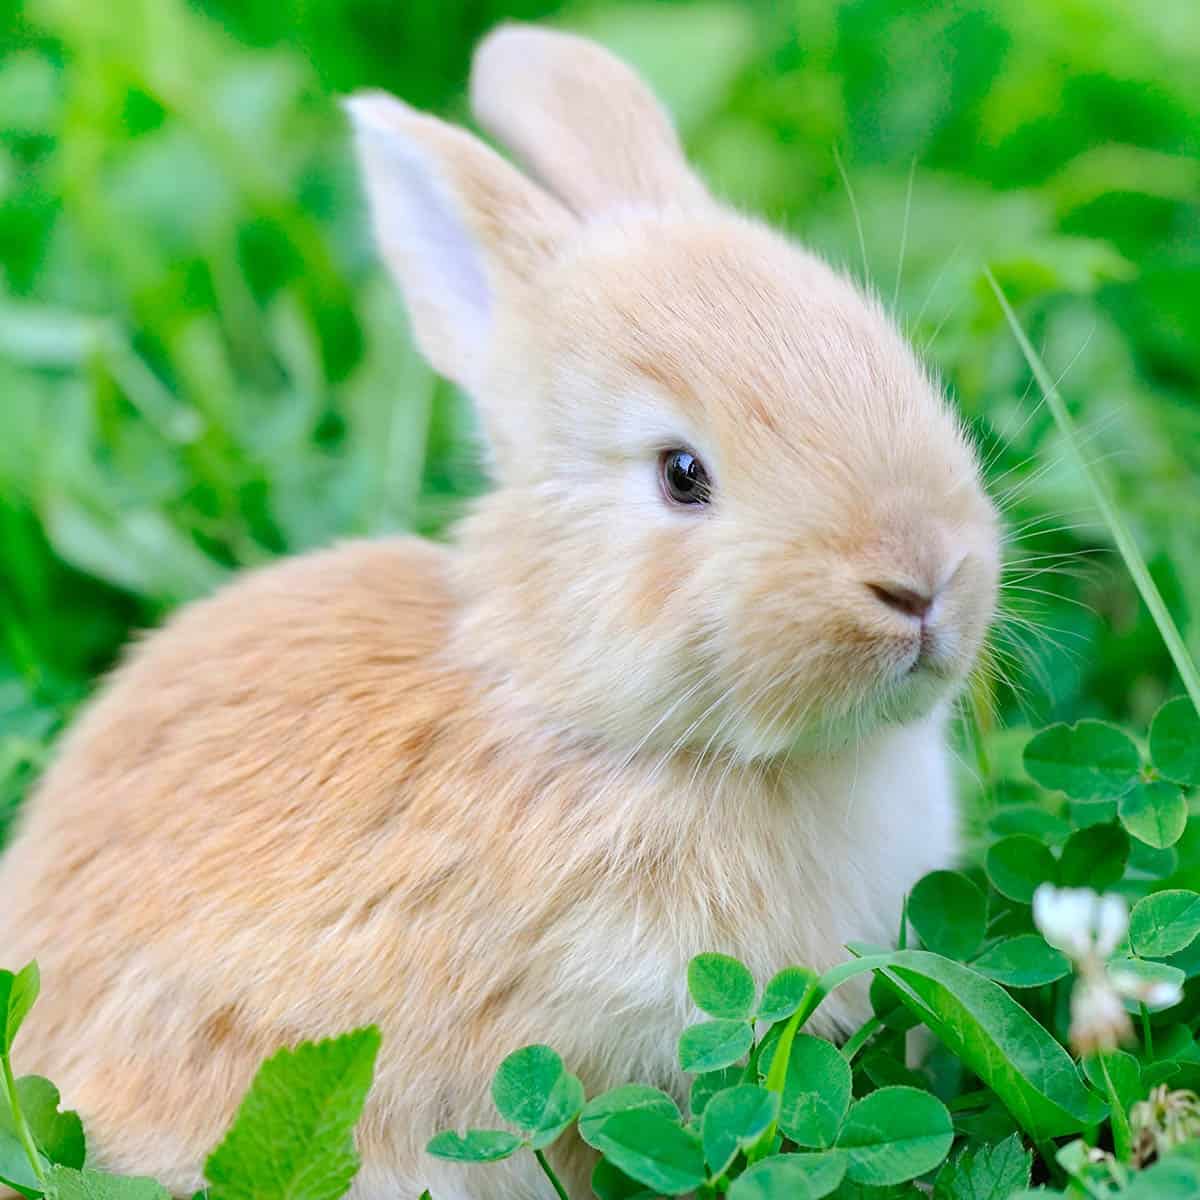 Rabbit surrounded by clovers